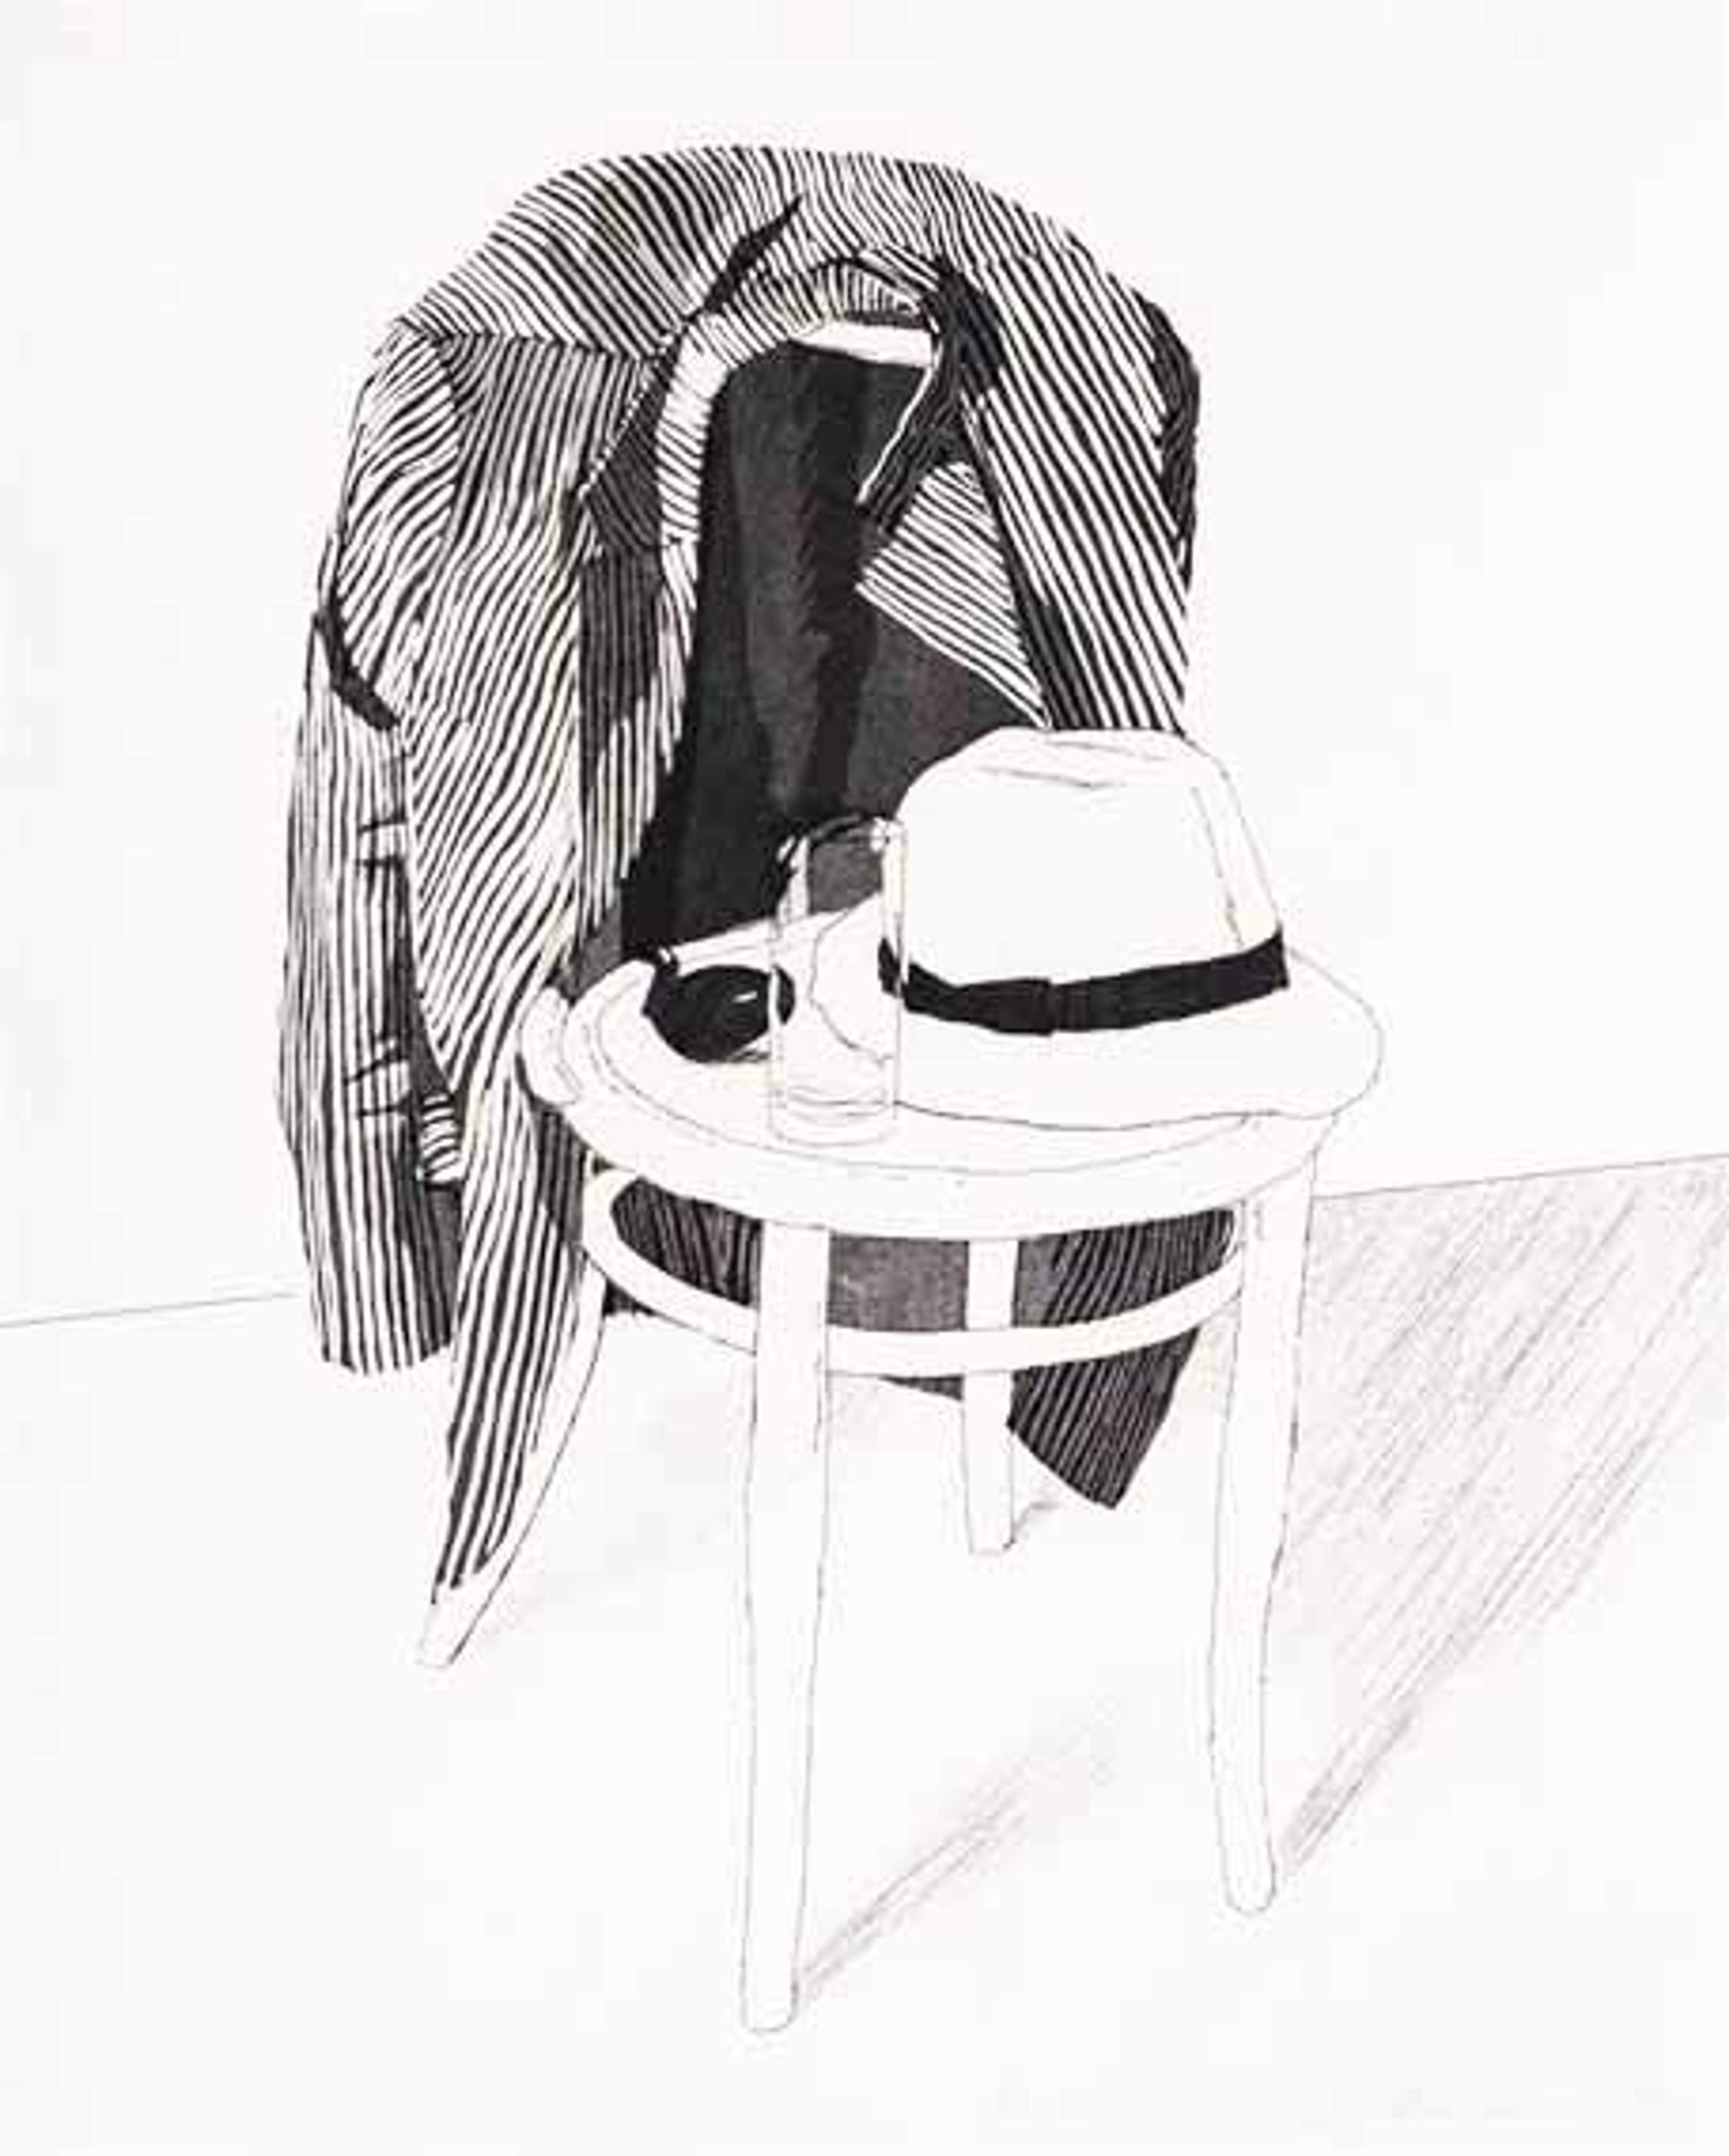 Panama Hat On A Chair With Jacket - Signed Print